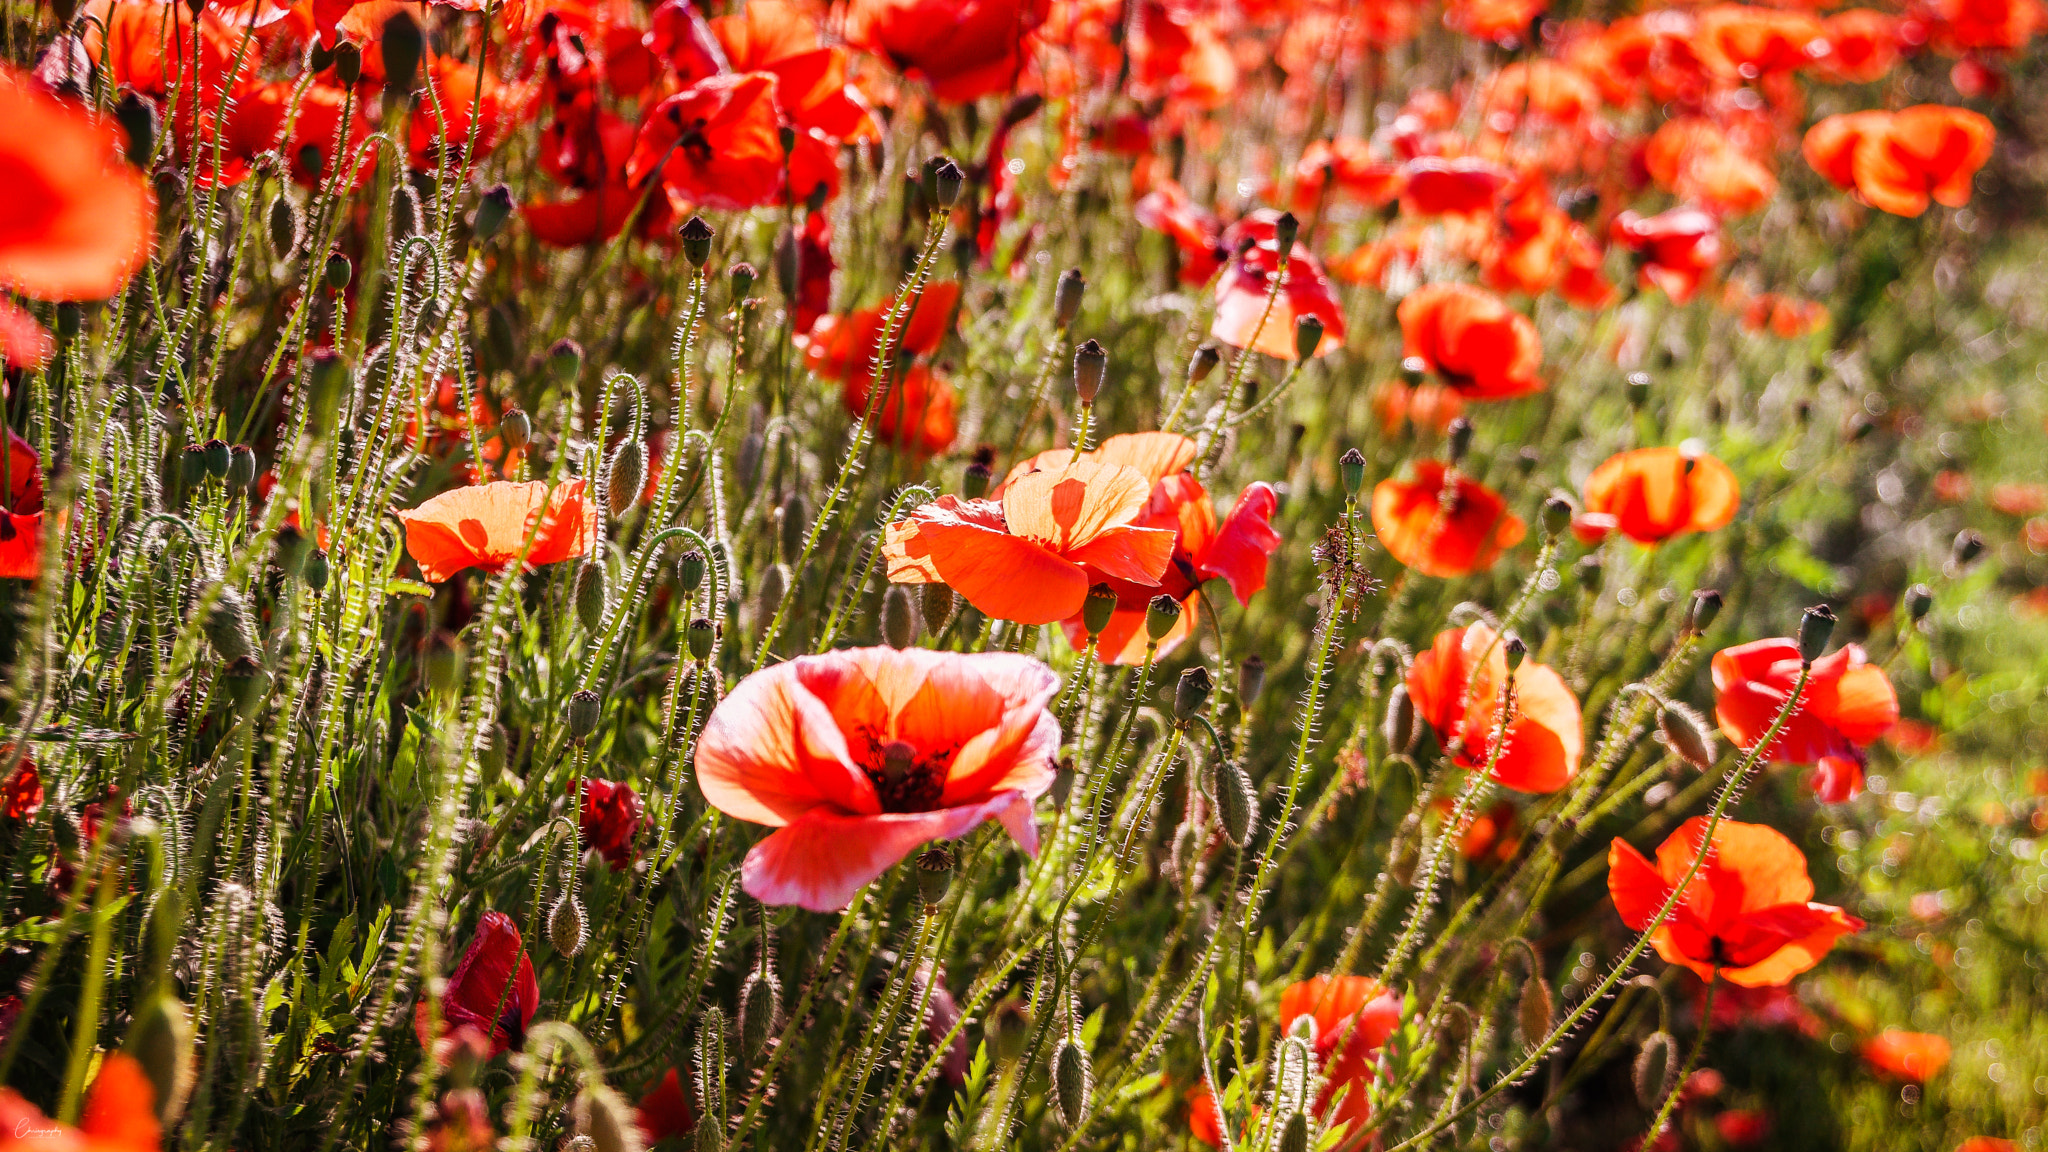 Sony a6500 sample photo. Field of poppies photography